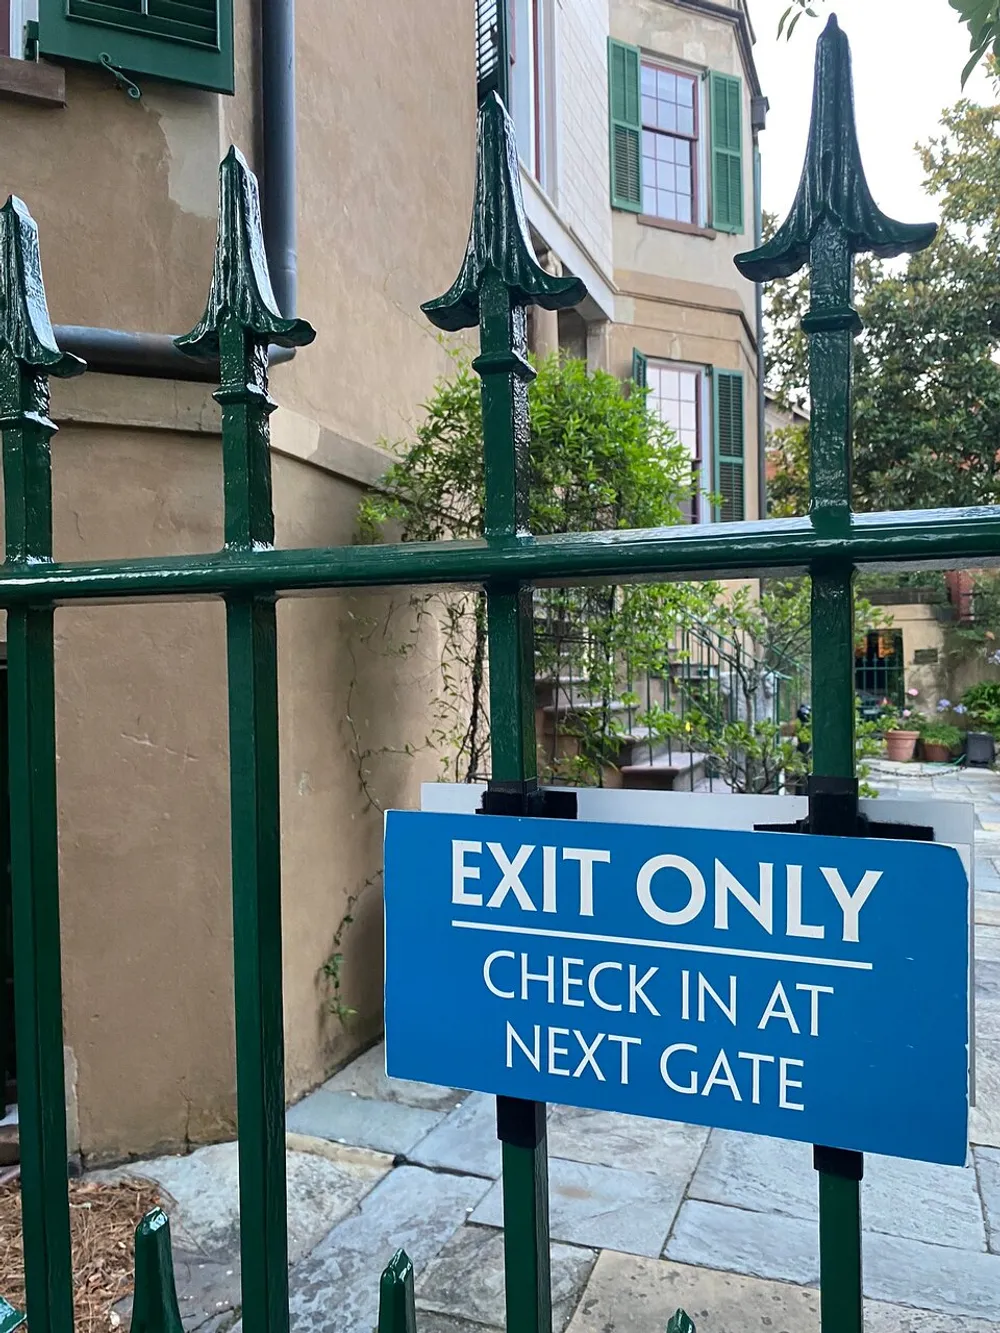 The image shows a blue sign attached to a green metal fence with pointed tips that reads EXIT ONLY CHECK IN AT NEXT GATE indicating directional flow for entrance or exit against a background featuring a portion of a building with green shutters